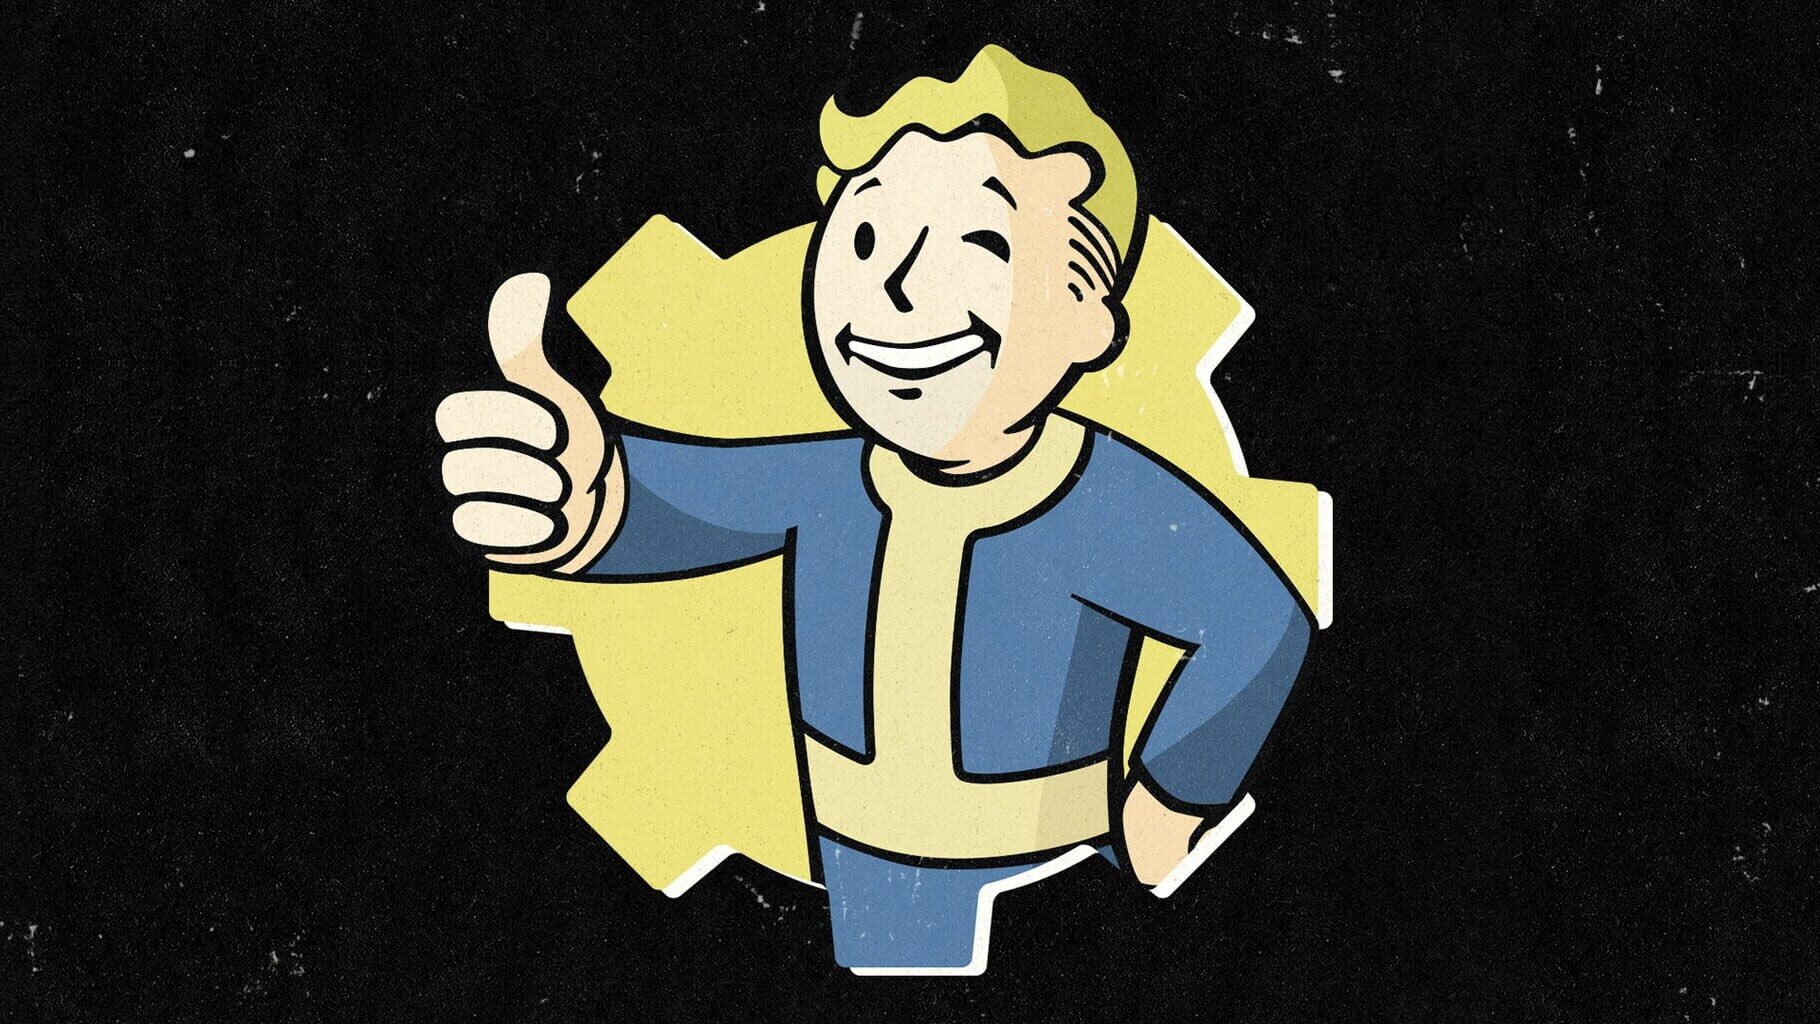 Arte - Fallout 4: Game of the Year Edition